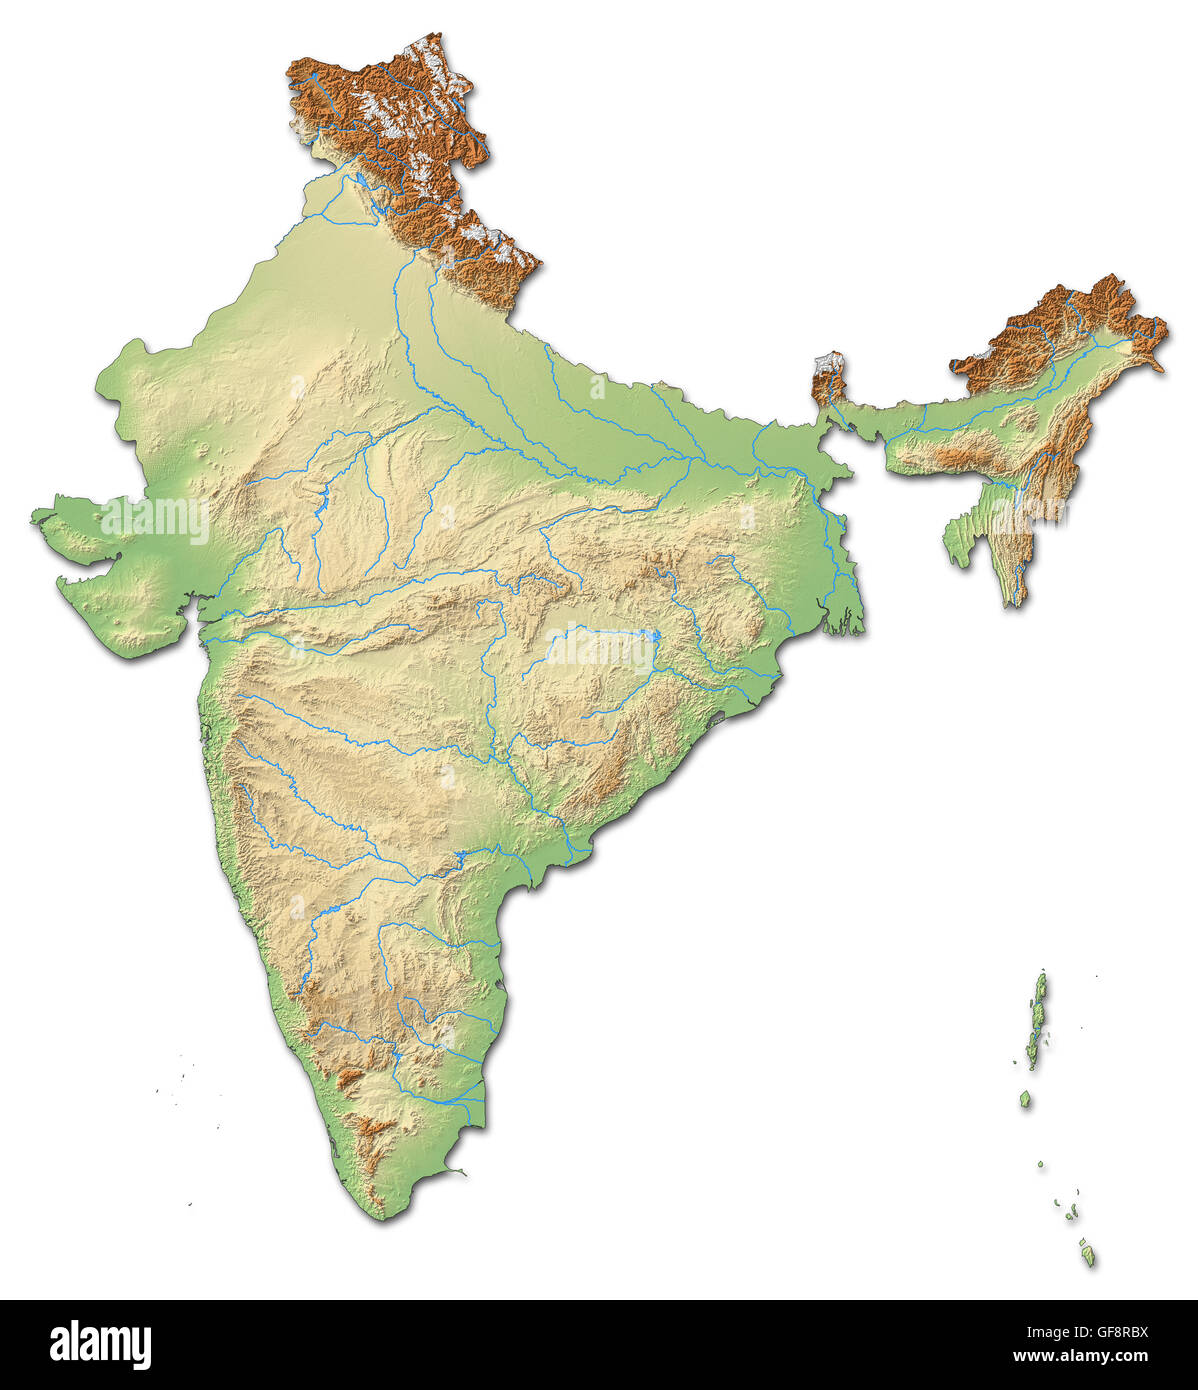 Relief map of India with shaded relief. Stock Photo